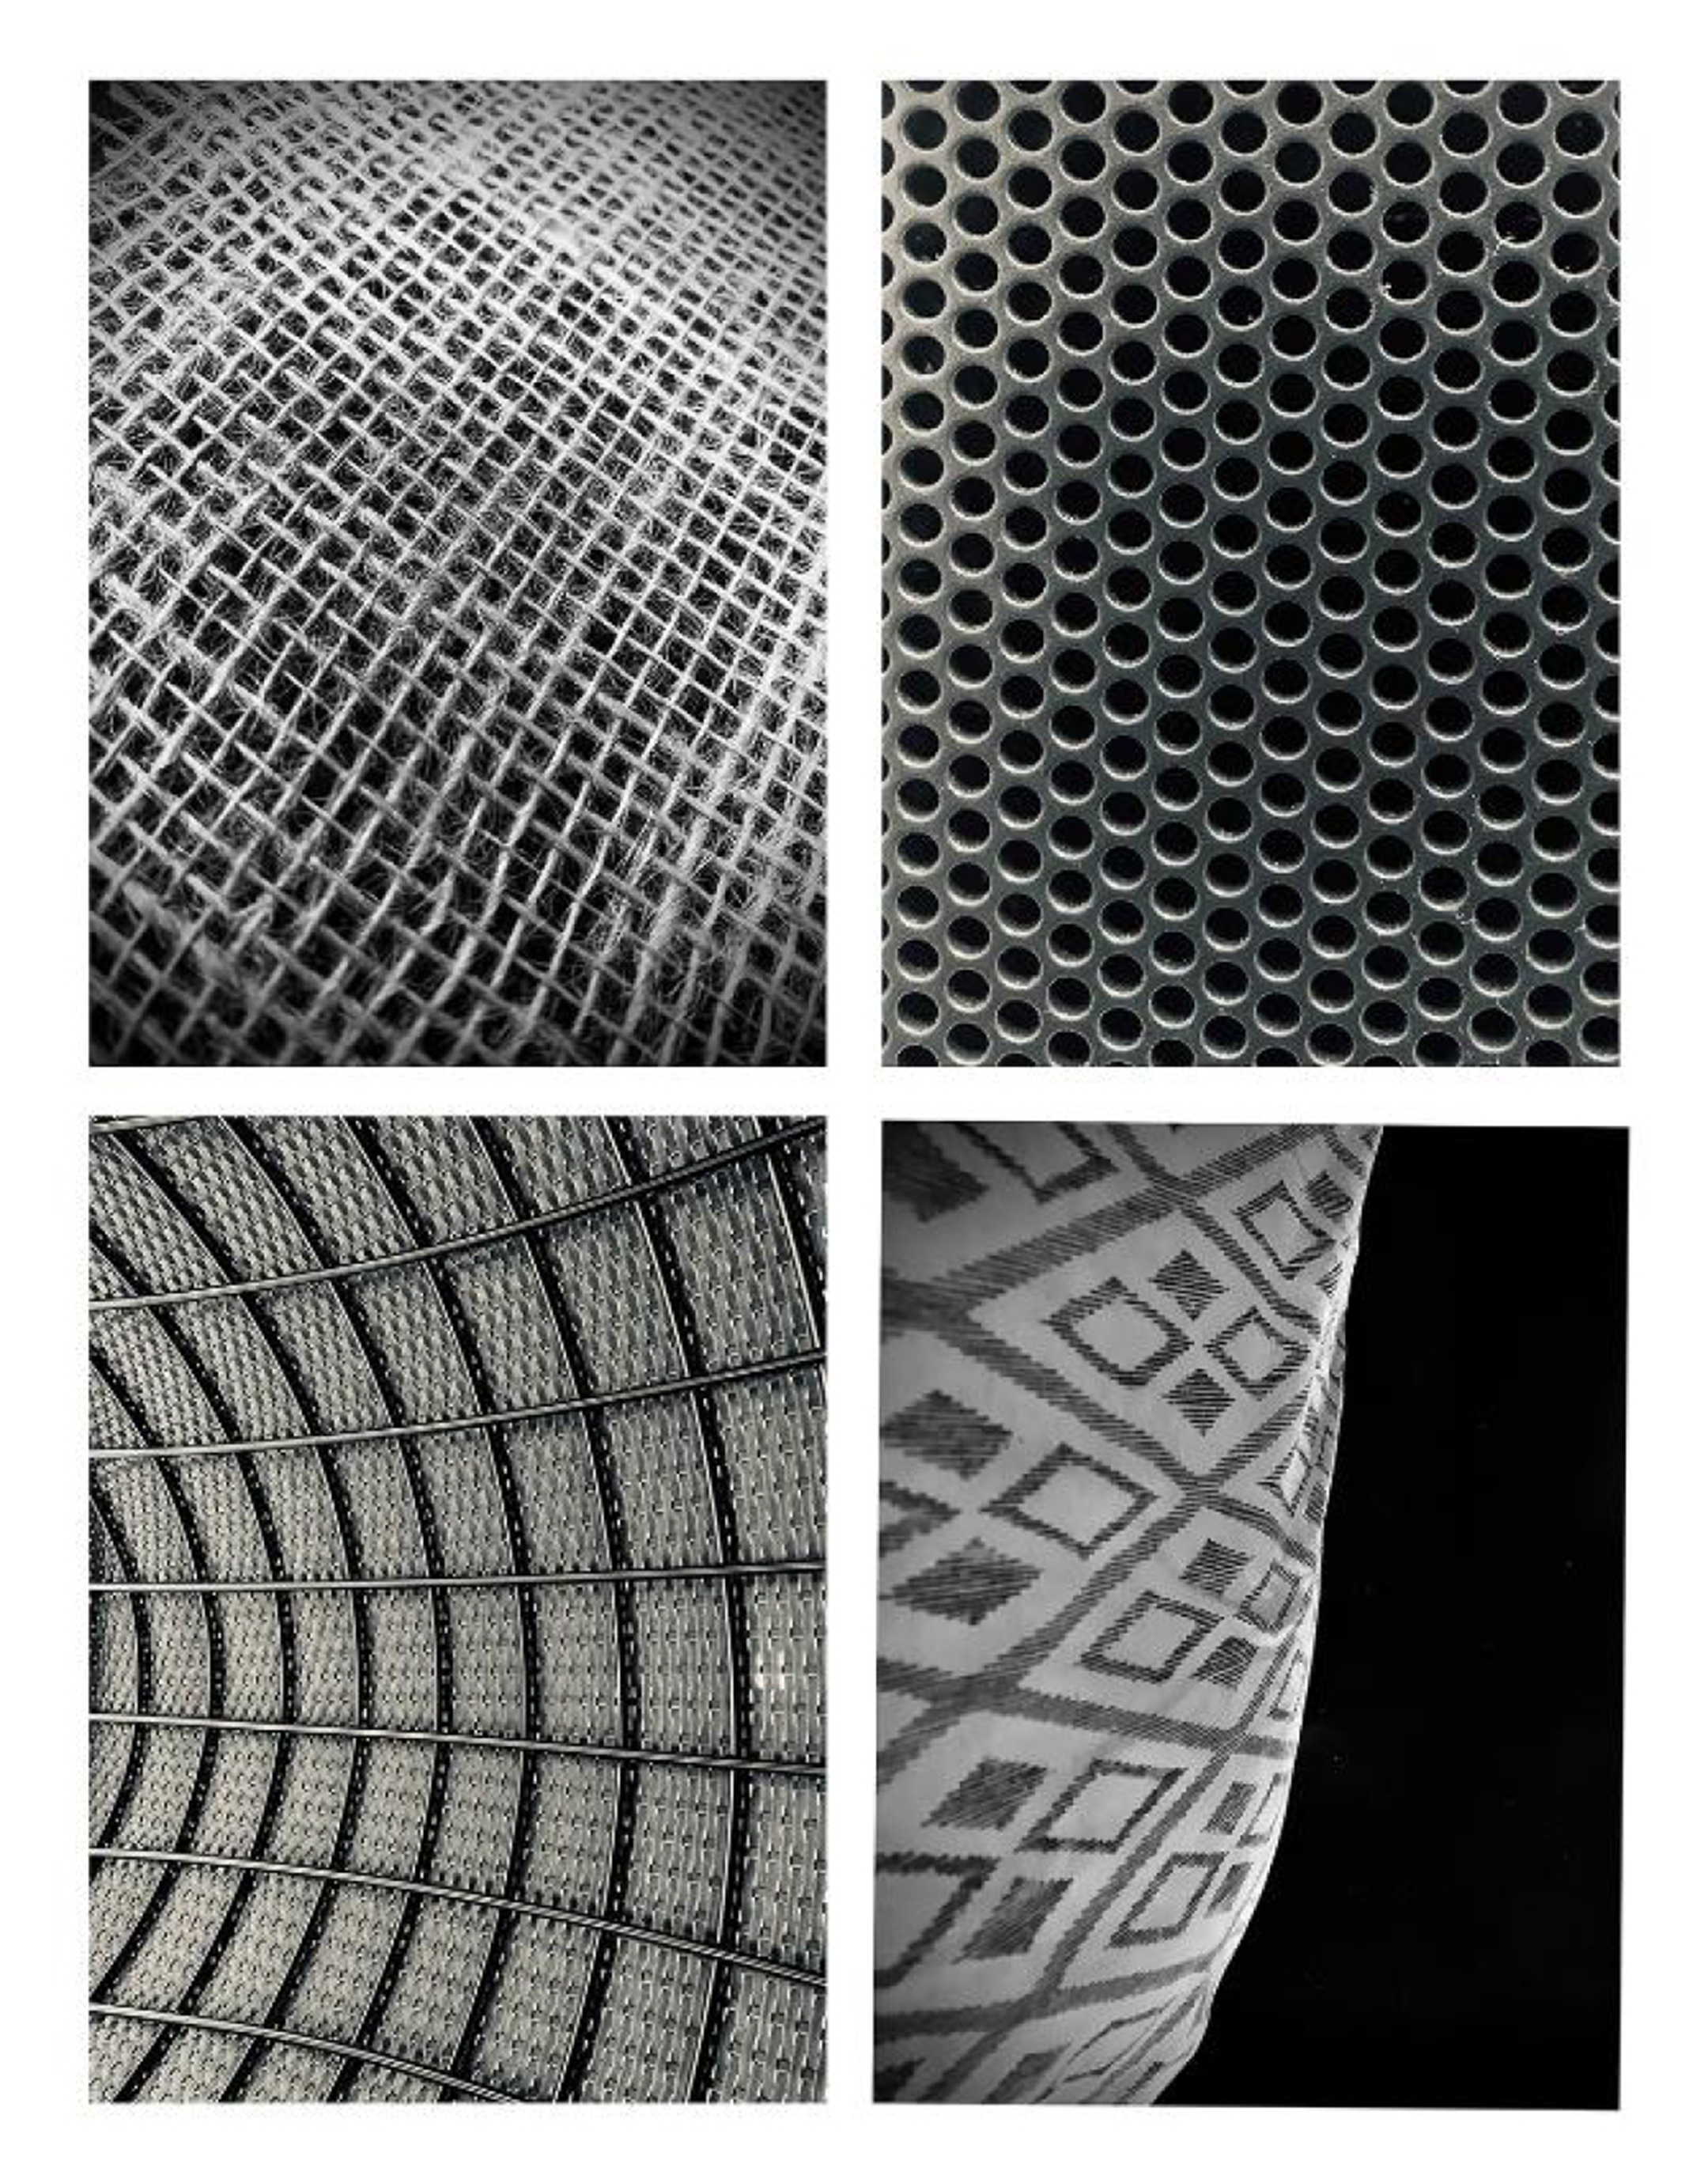 A grid of four black and white photos, two by two, of closeups of grates and walls